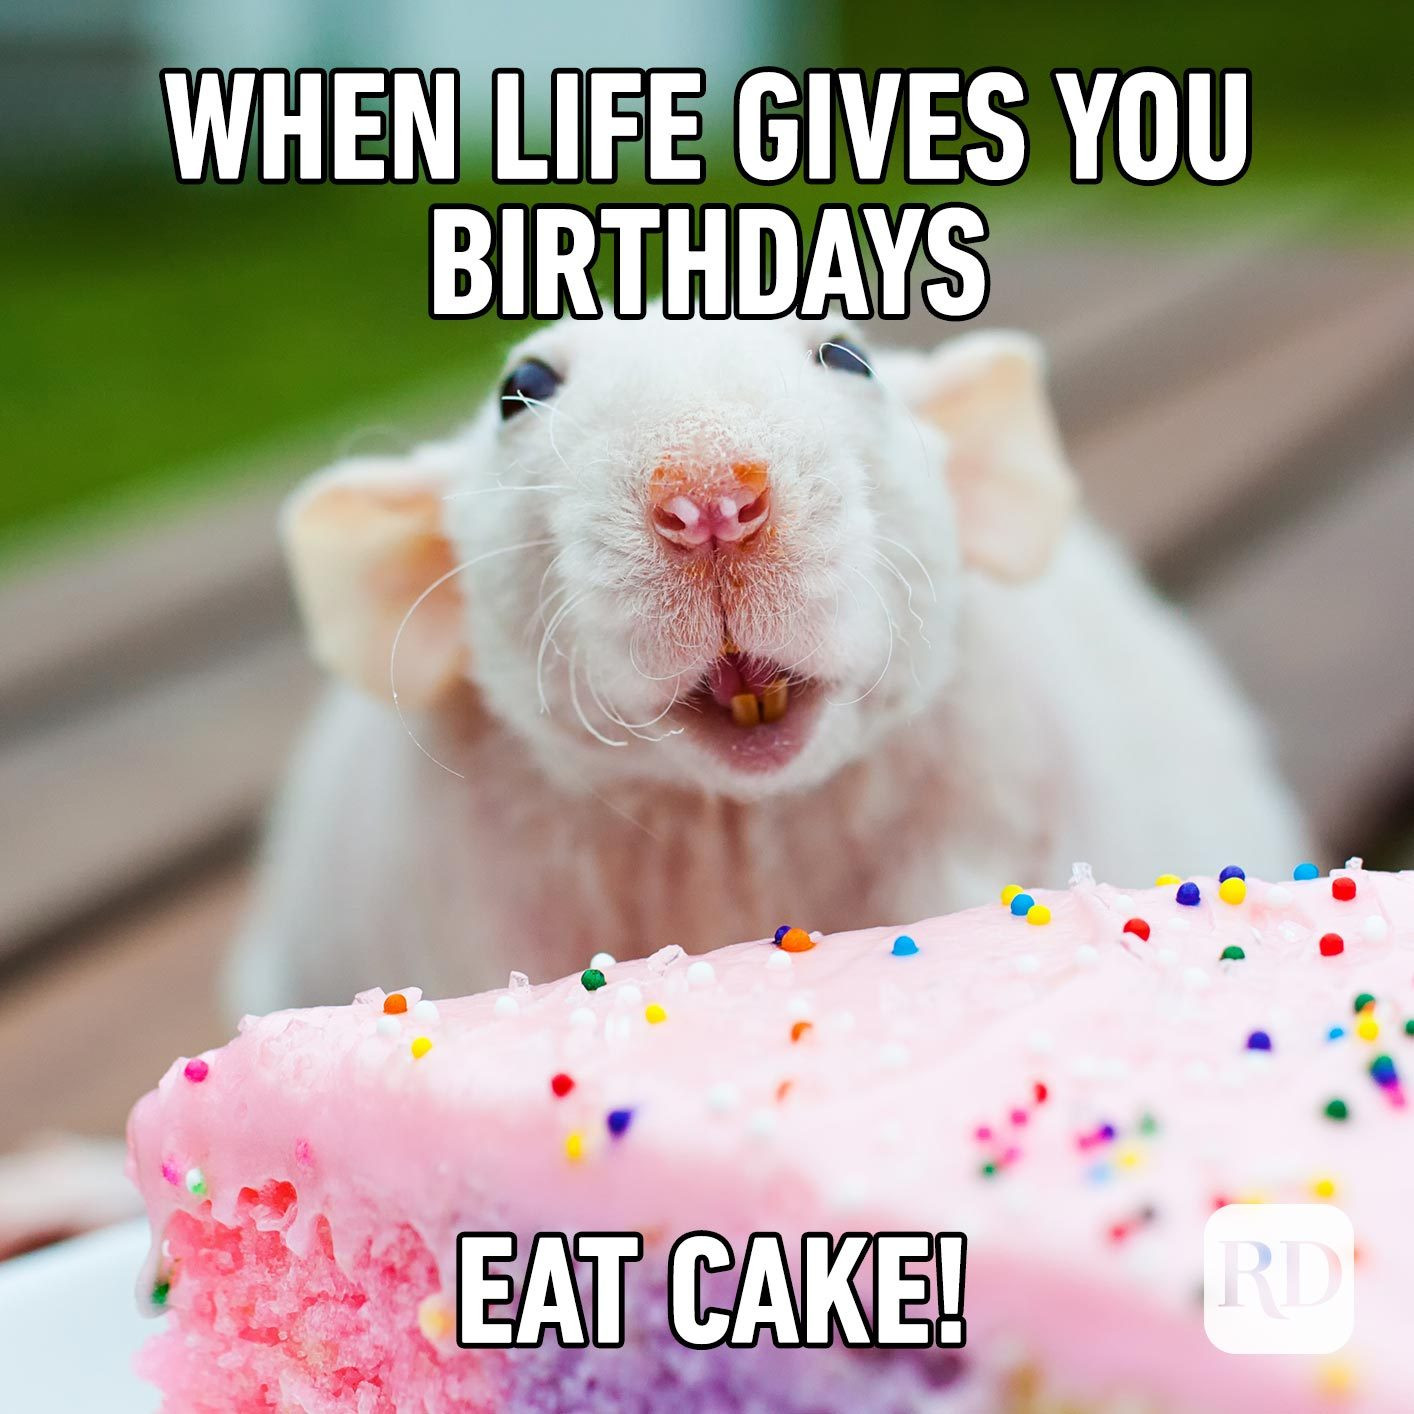 15 Recipes for Great Birthday Cake Meme – Easy Recipes To Make at Home